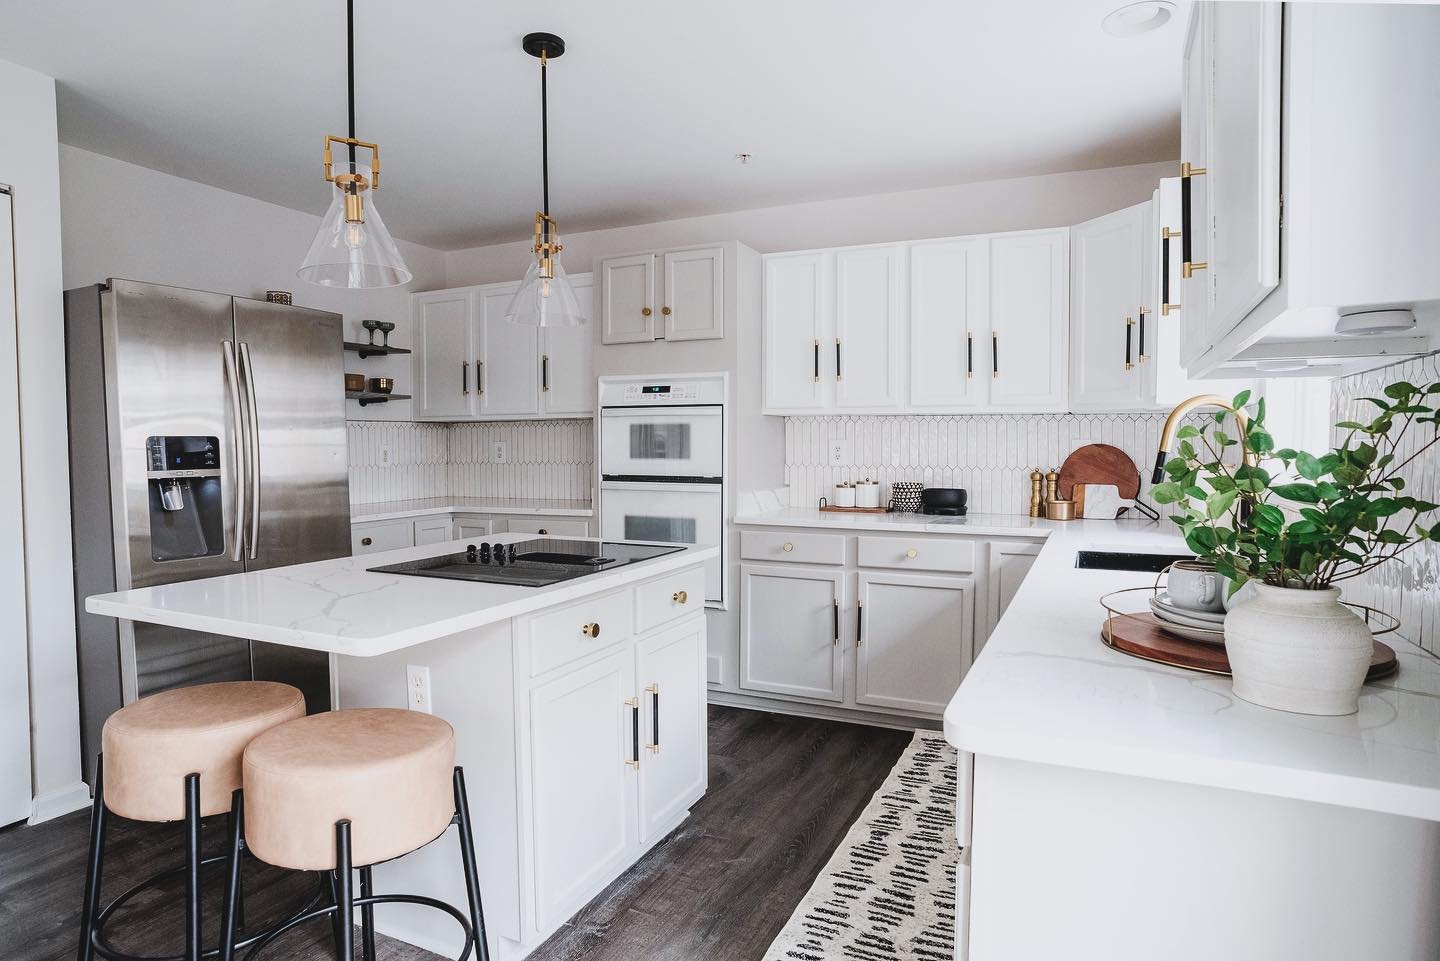 Transformed this kitchen into a space that's not only functional but also bright and inviting! From maximizing storage to enhancing natural light, every detail was carefully considered. Swipe for the before and after! 

📸: @satokobergphotography 
. 